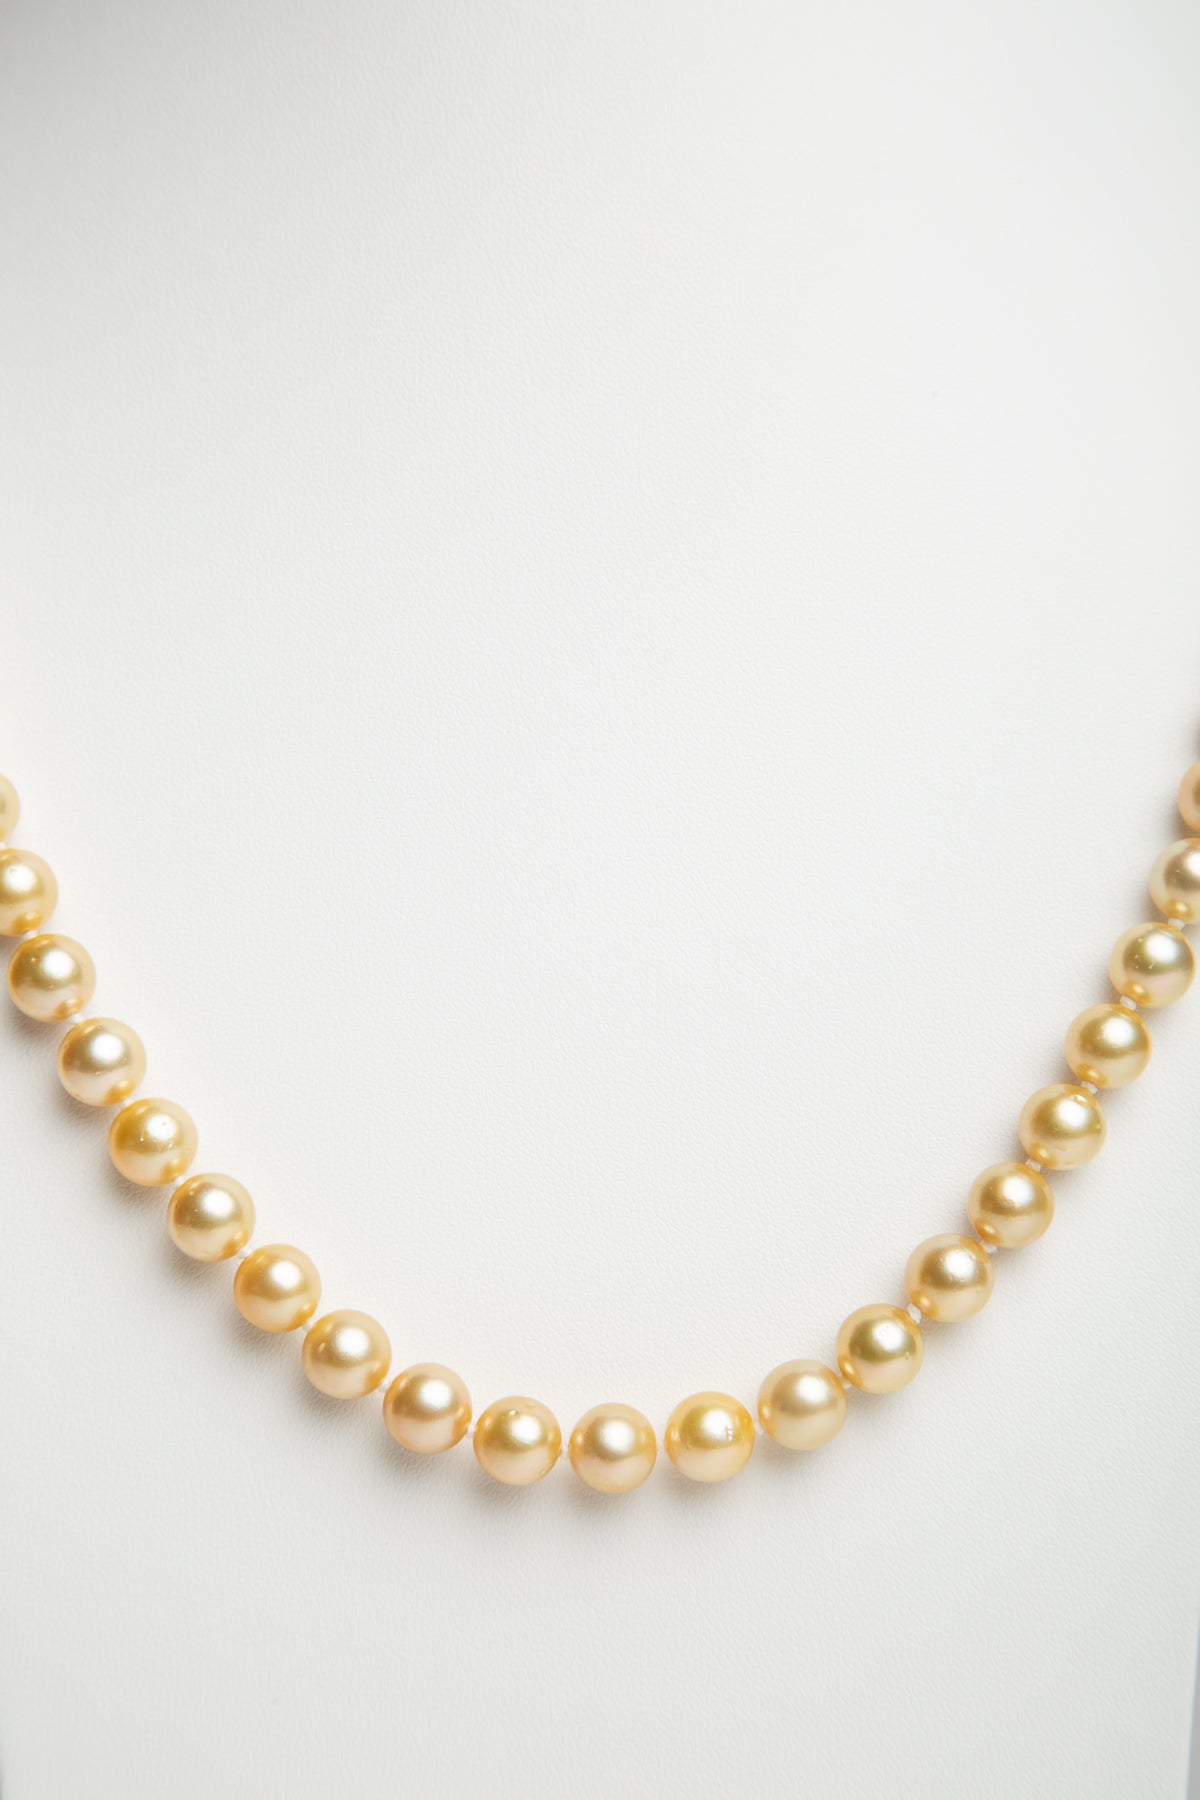 MAXFIELD PRIVATE COLLECTION | 9-10MM ROUND PEARL NECKLACE